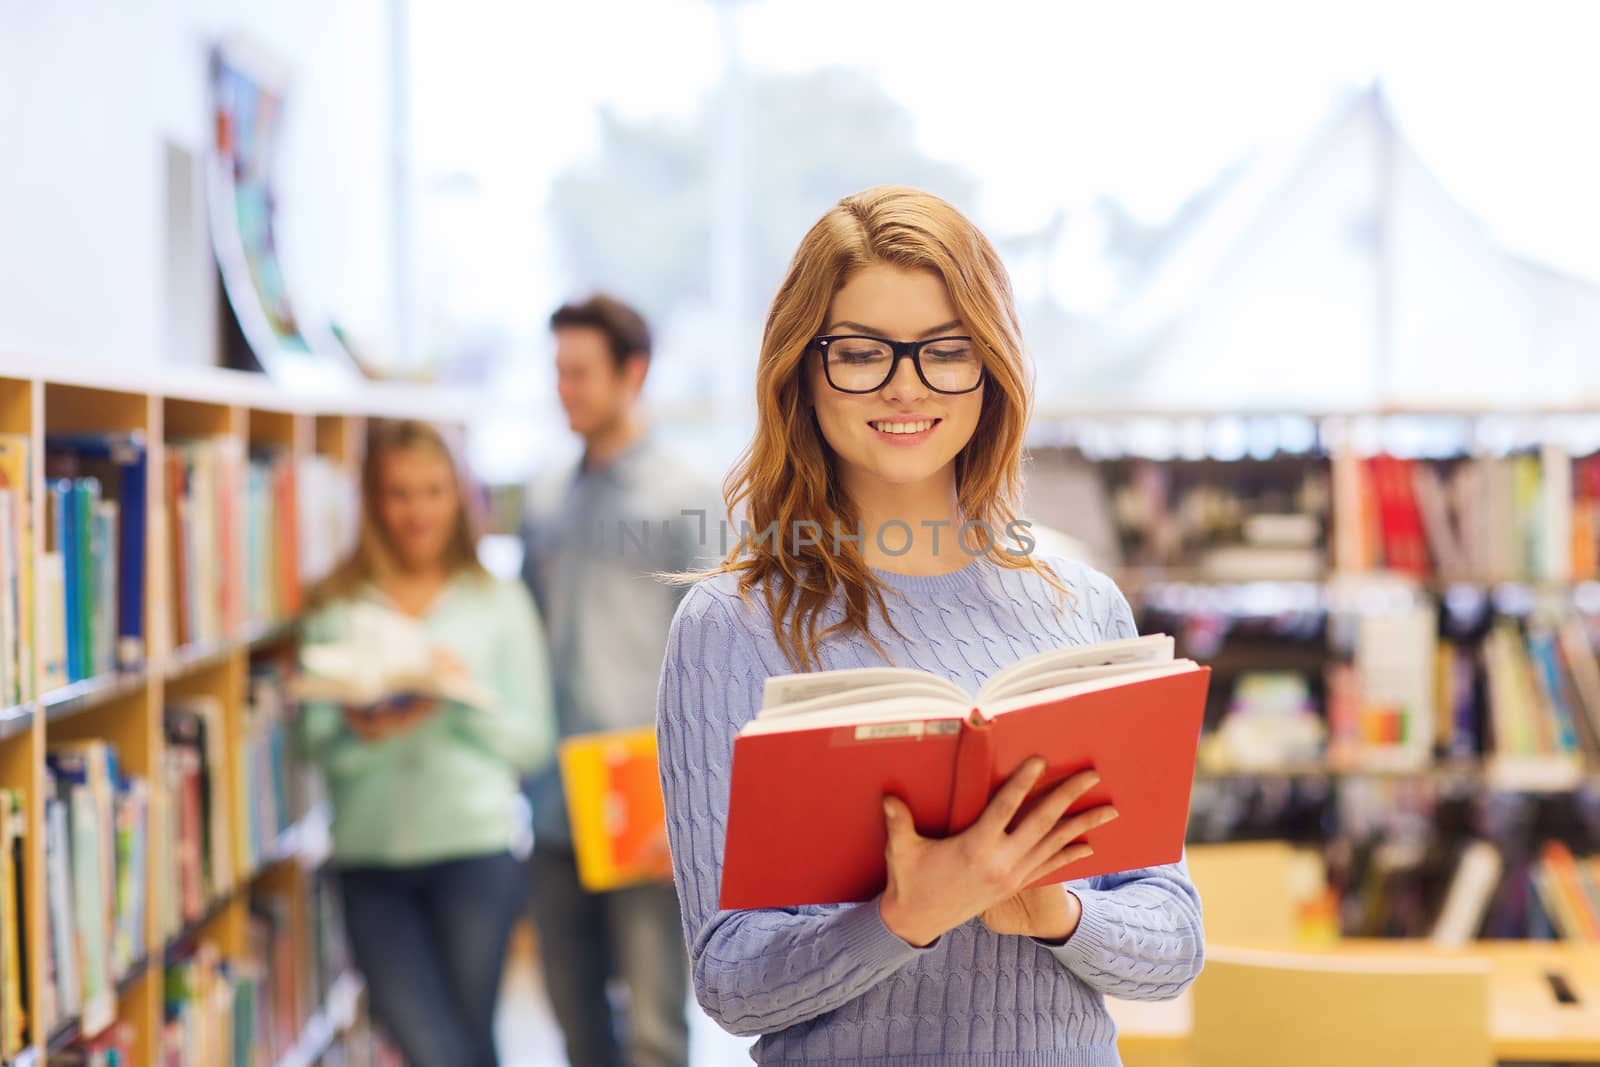 people, knowledge, education and school concept - happy student girl or young woman with book in library